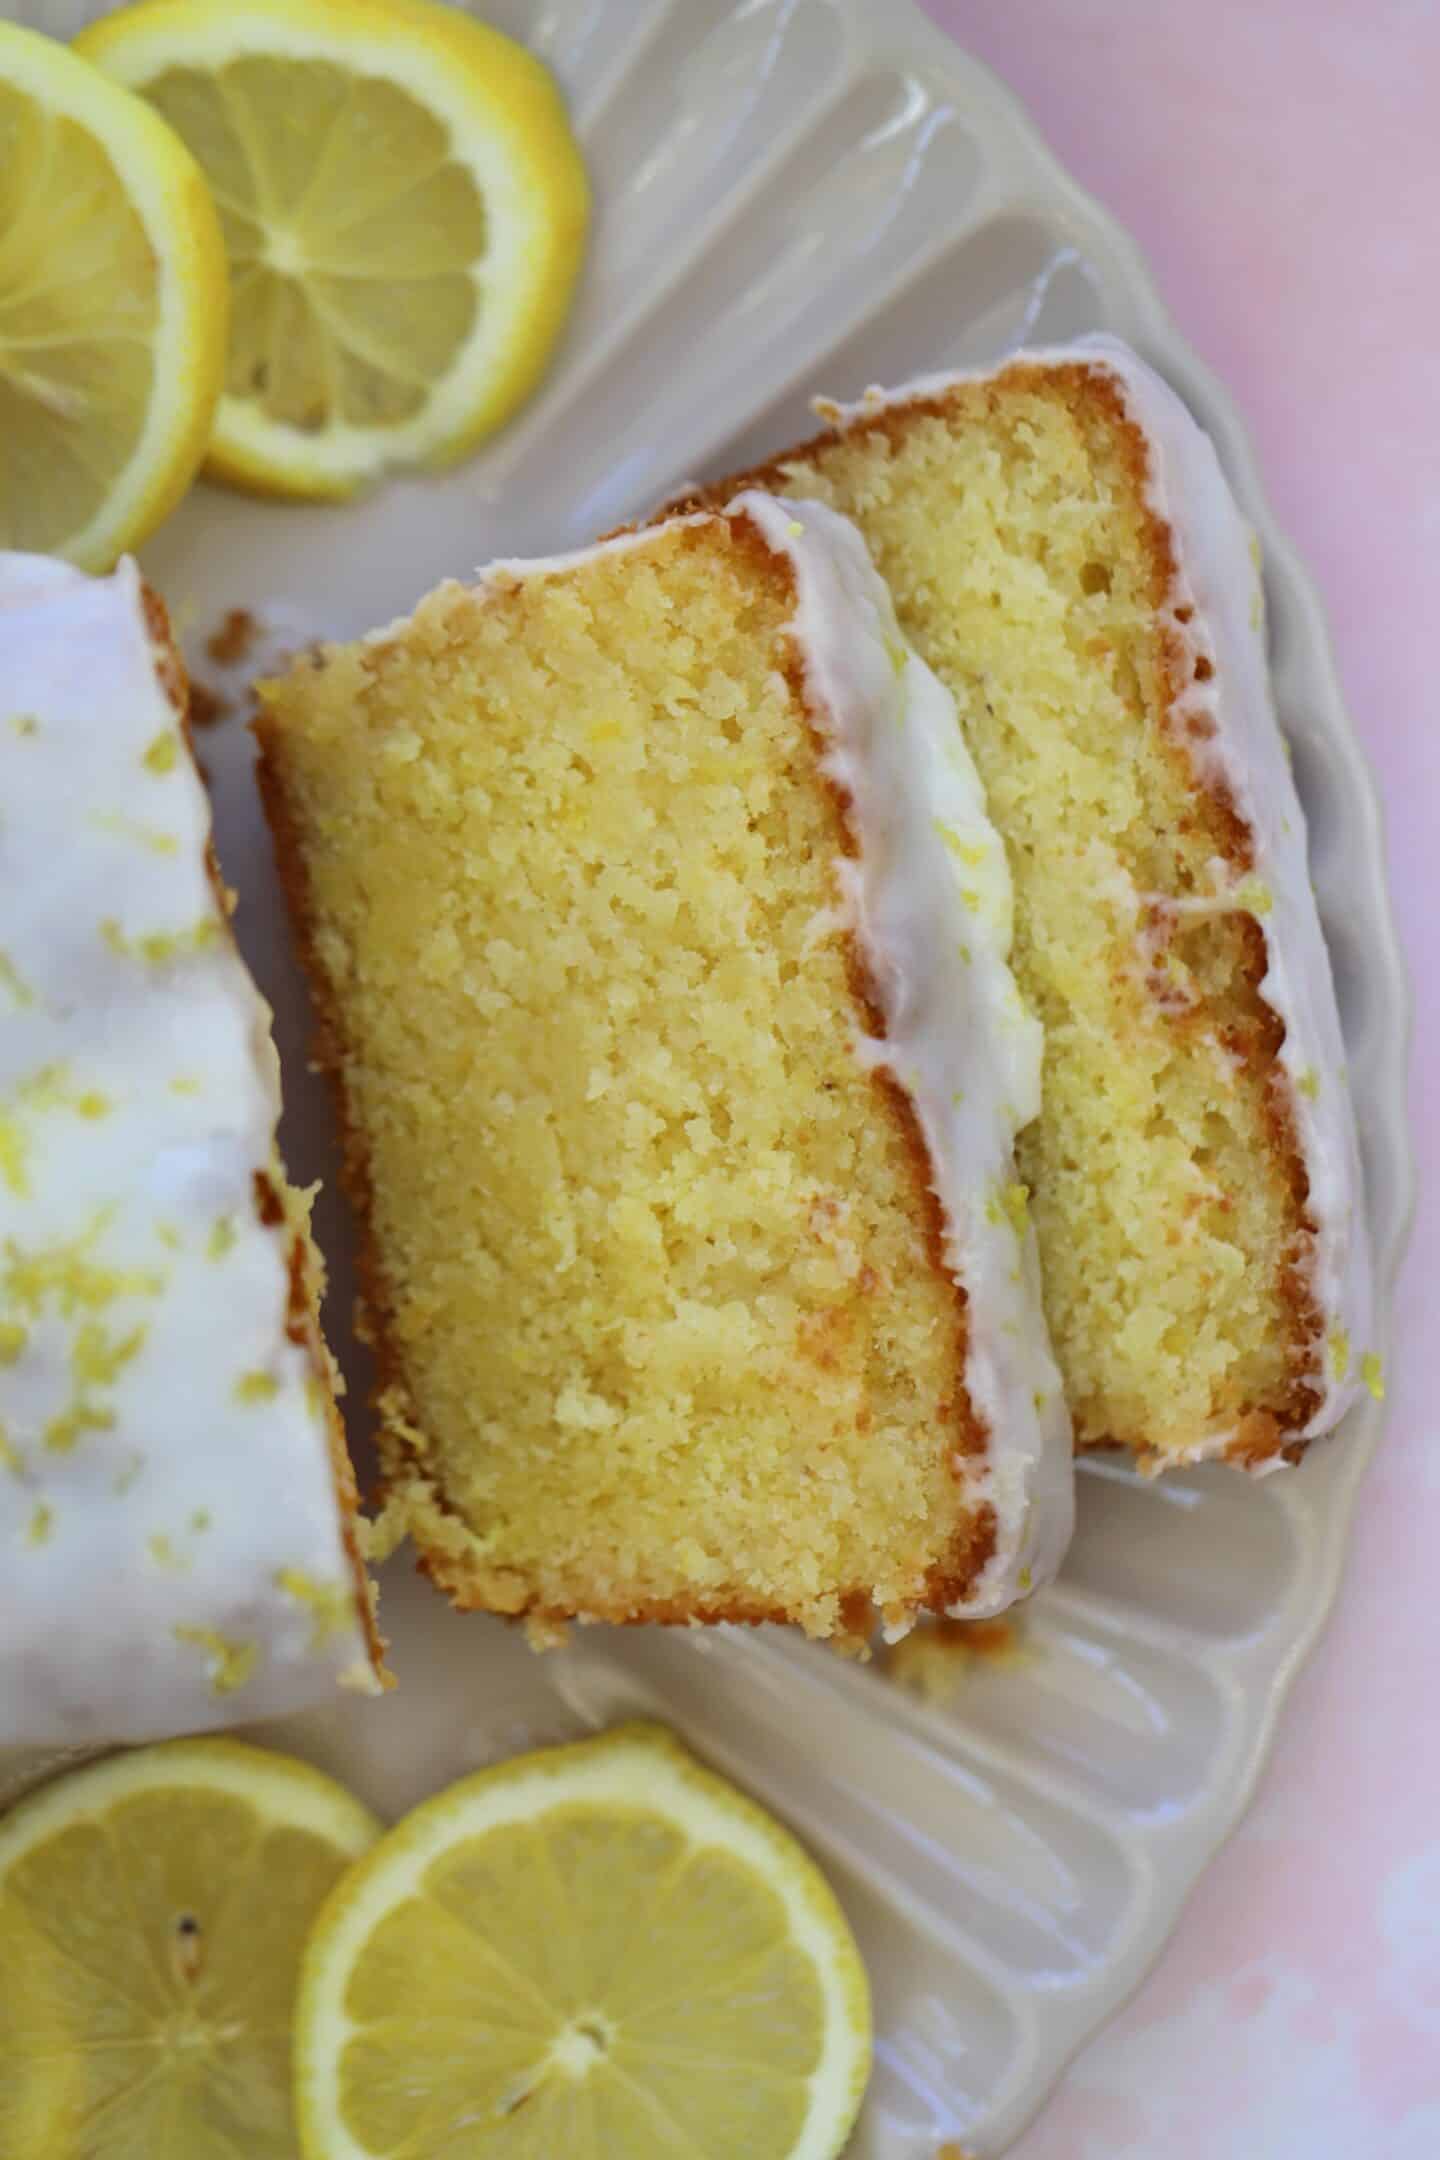 Slices of gluten free lemon drizzle cake on a plate.